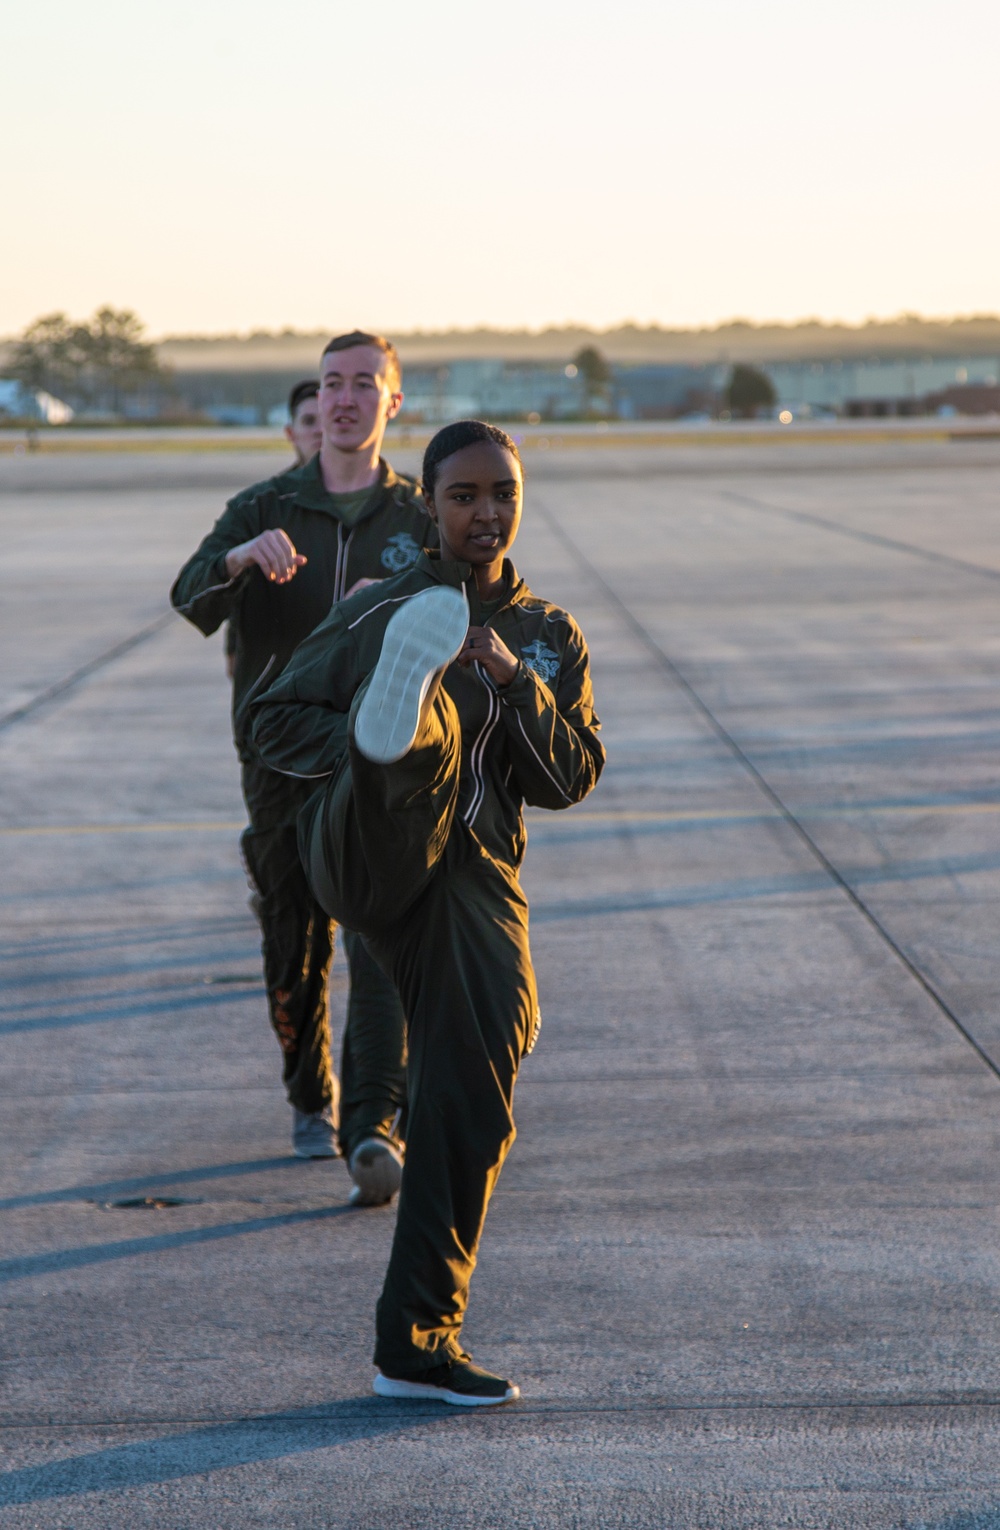 MAG-14 conducts physical training on the flightline